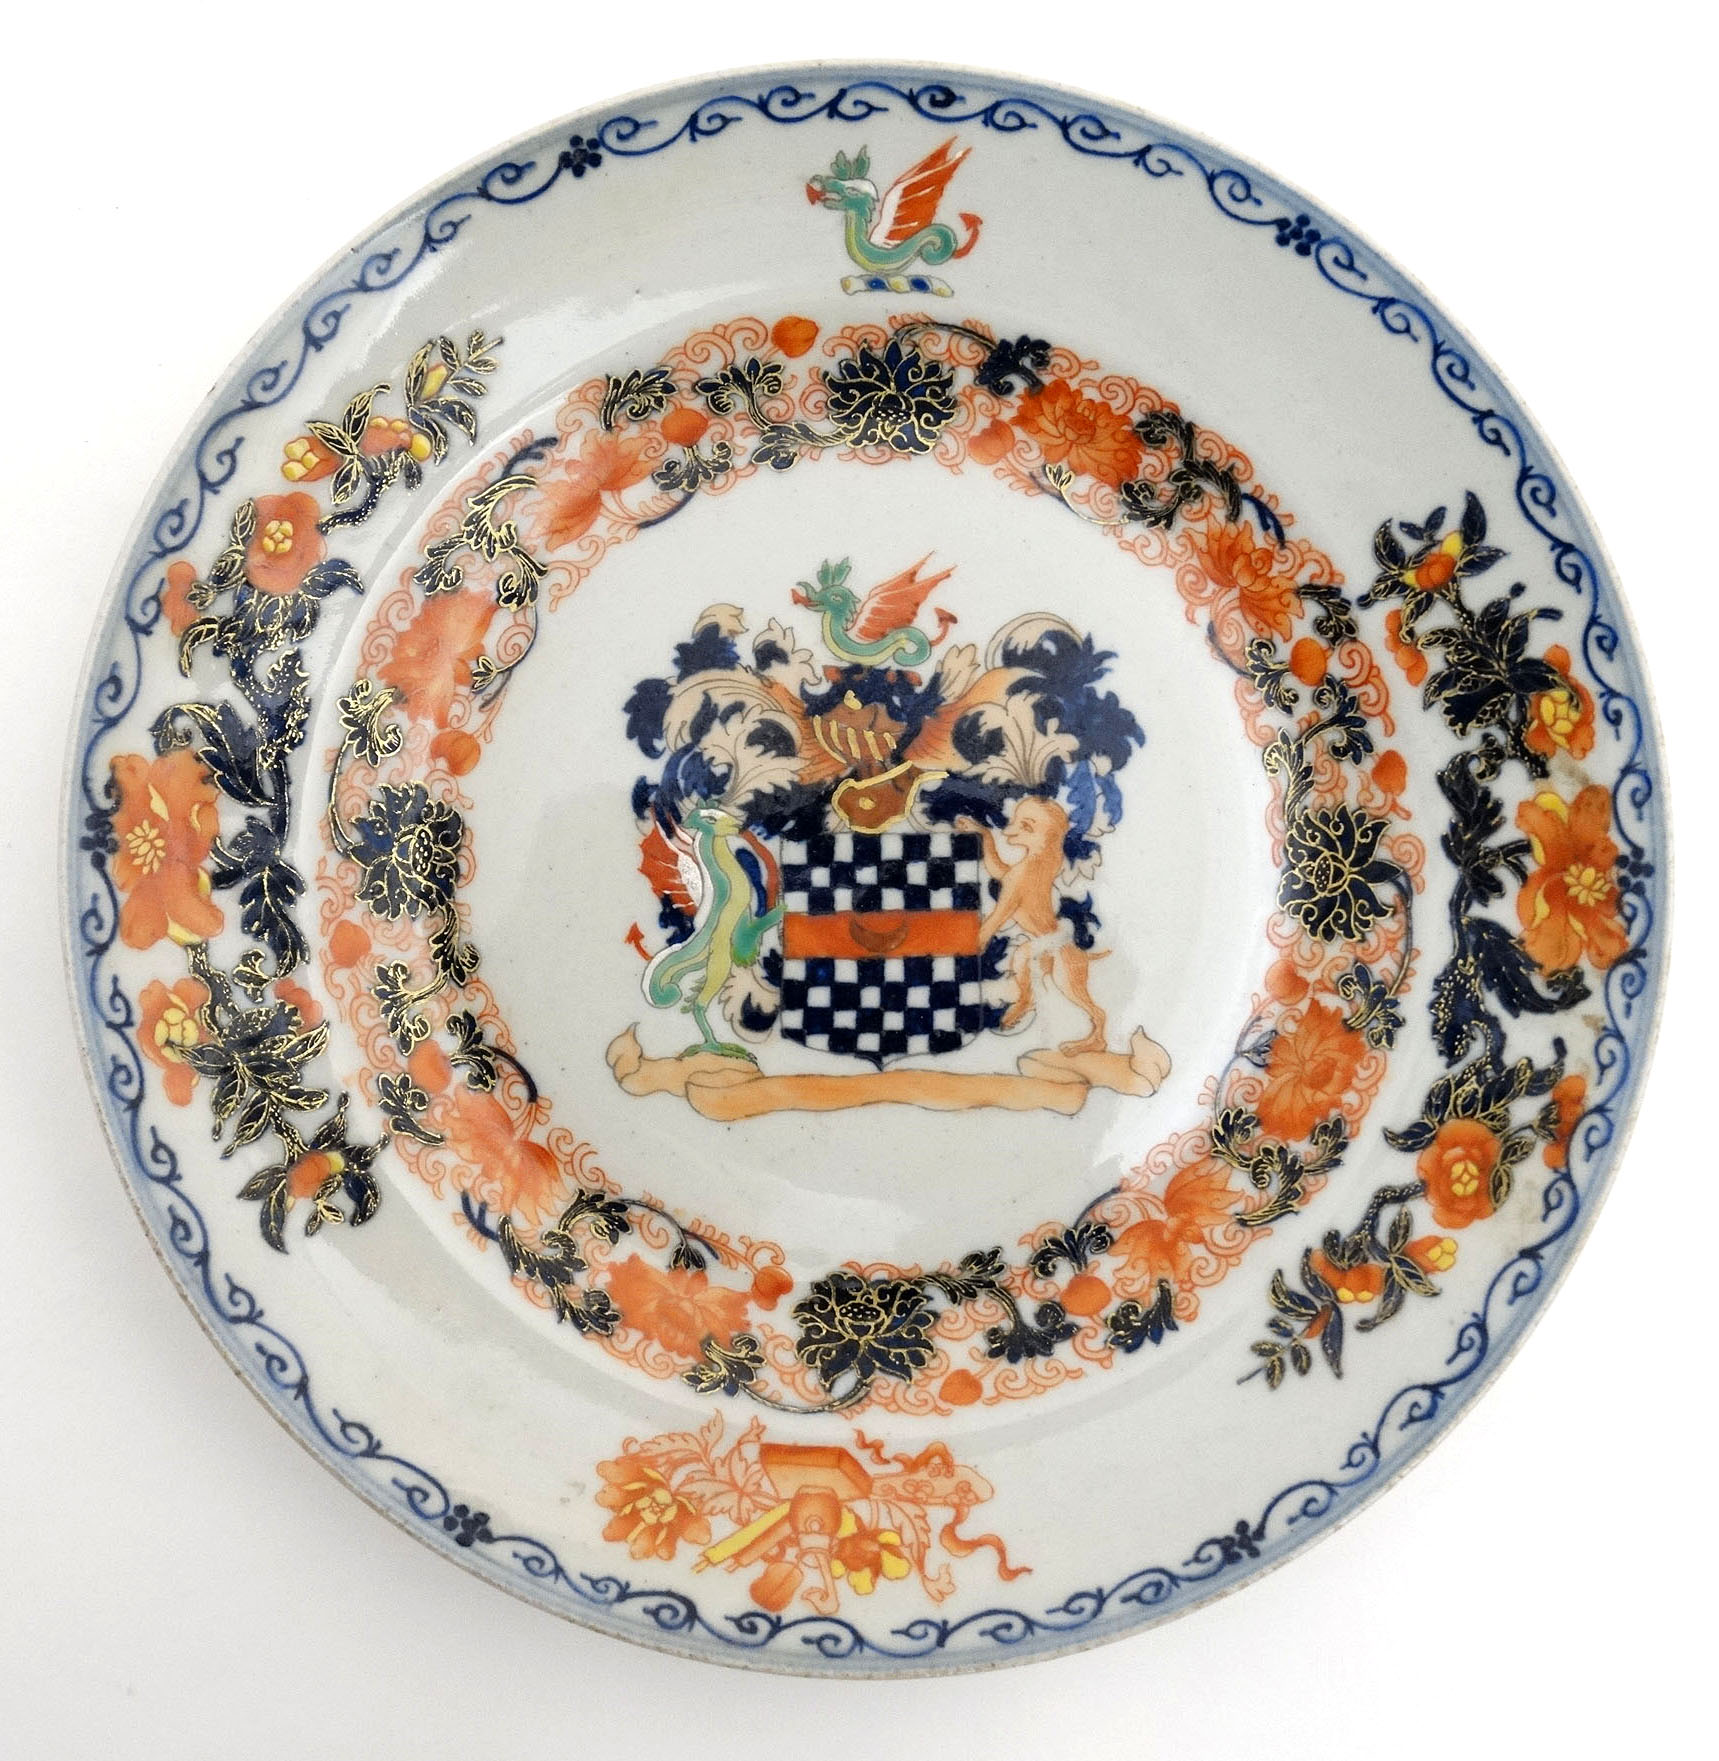 Chinese Armoral Plate Sold For £800